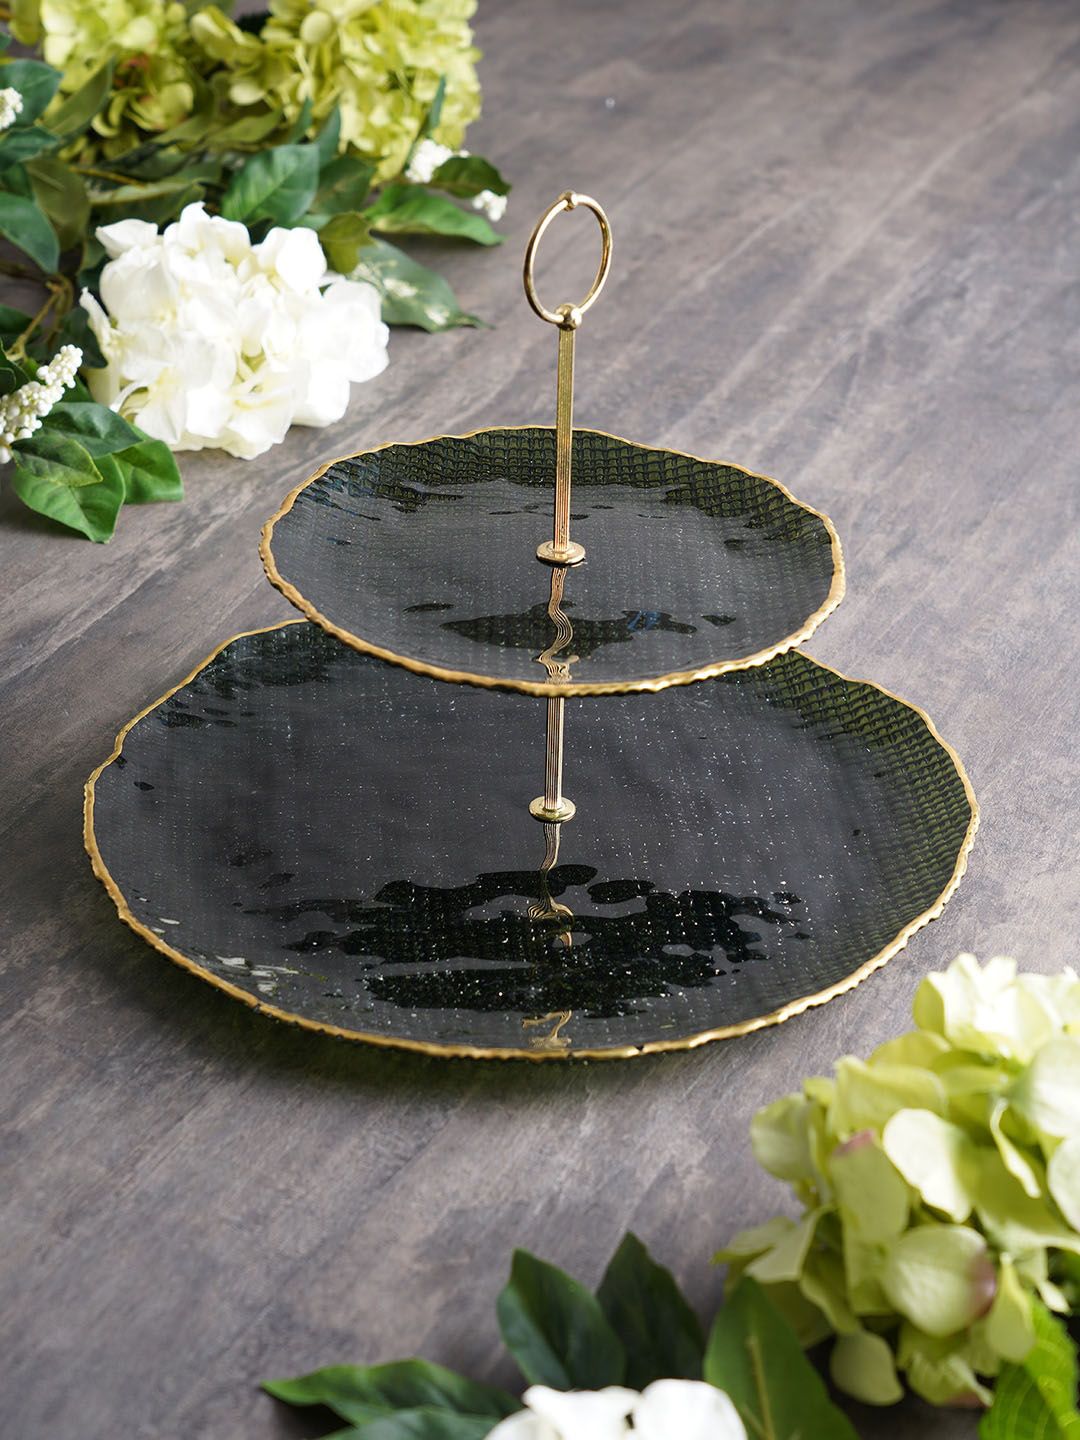 Pure Home and Living Textured Ceramic 2-Layered Cake Stand Price in India